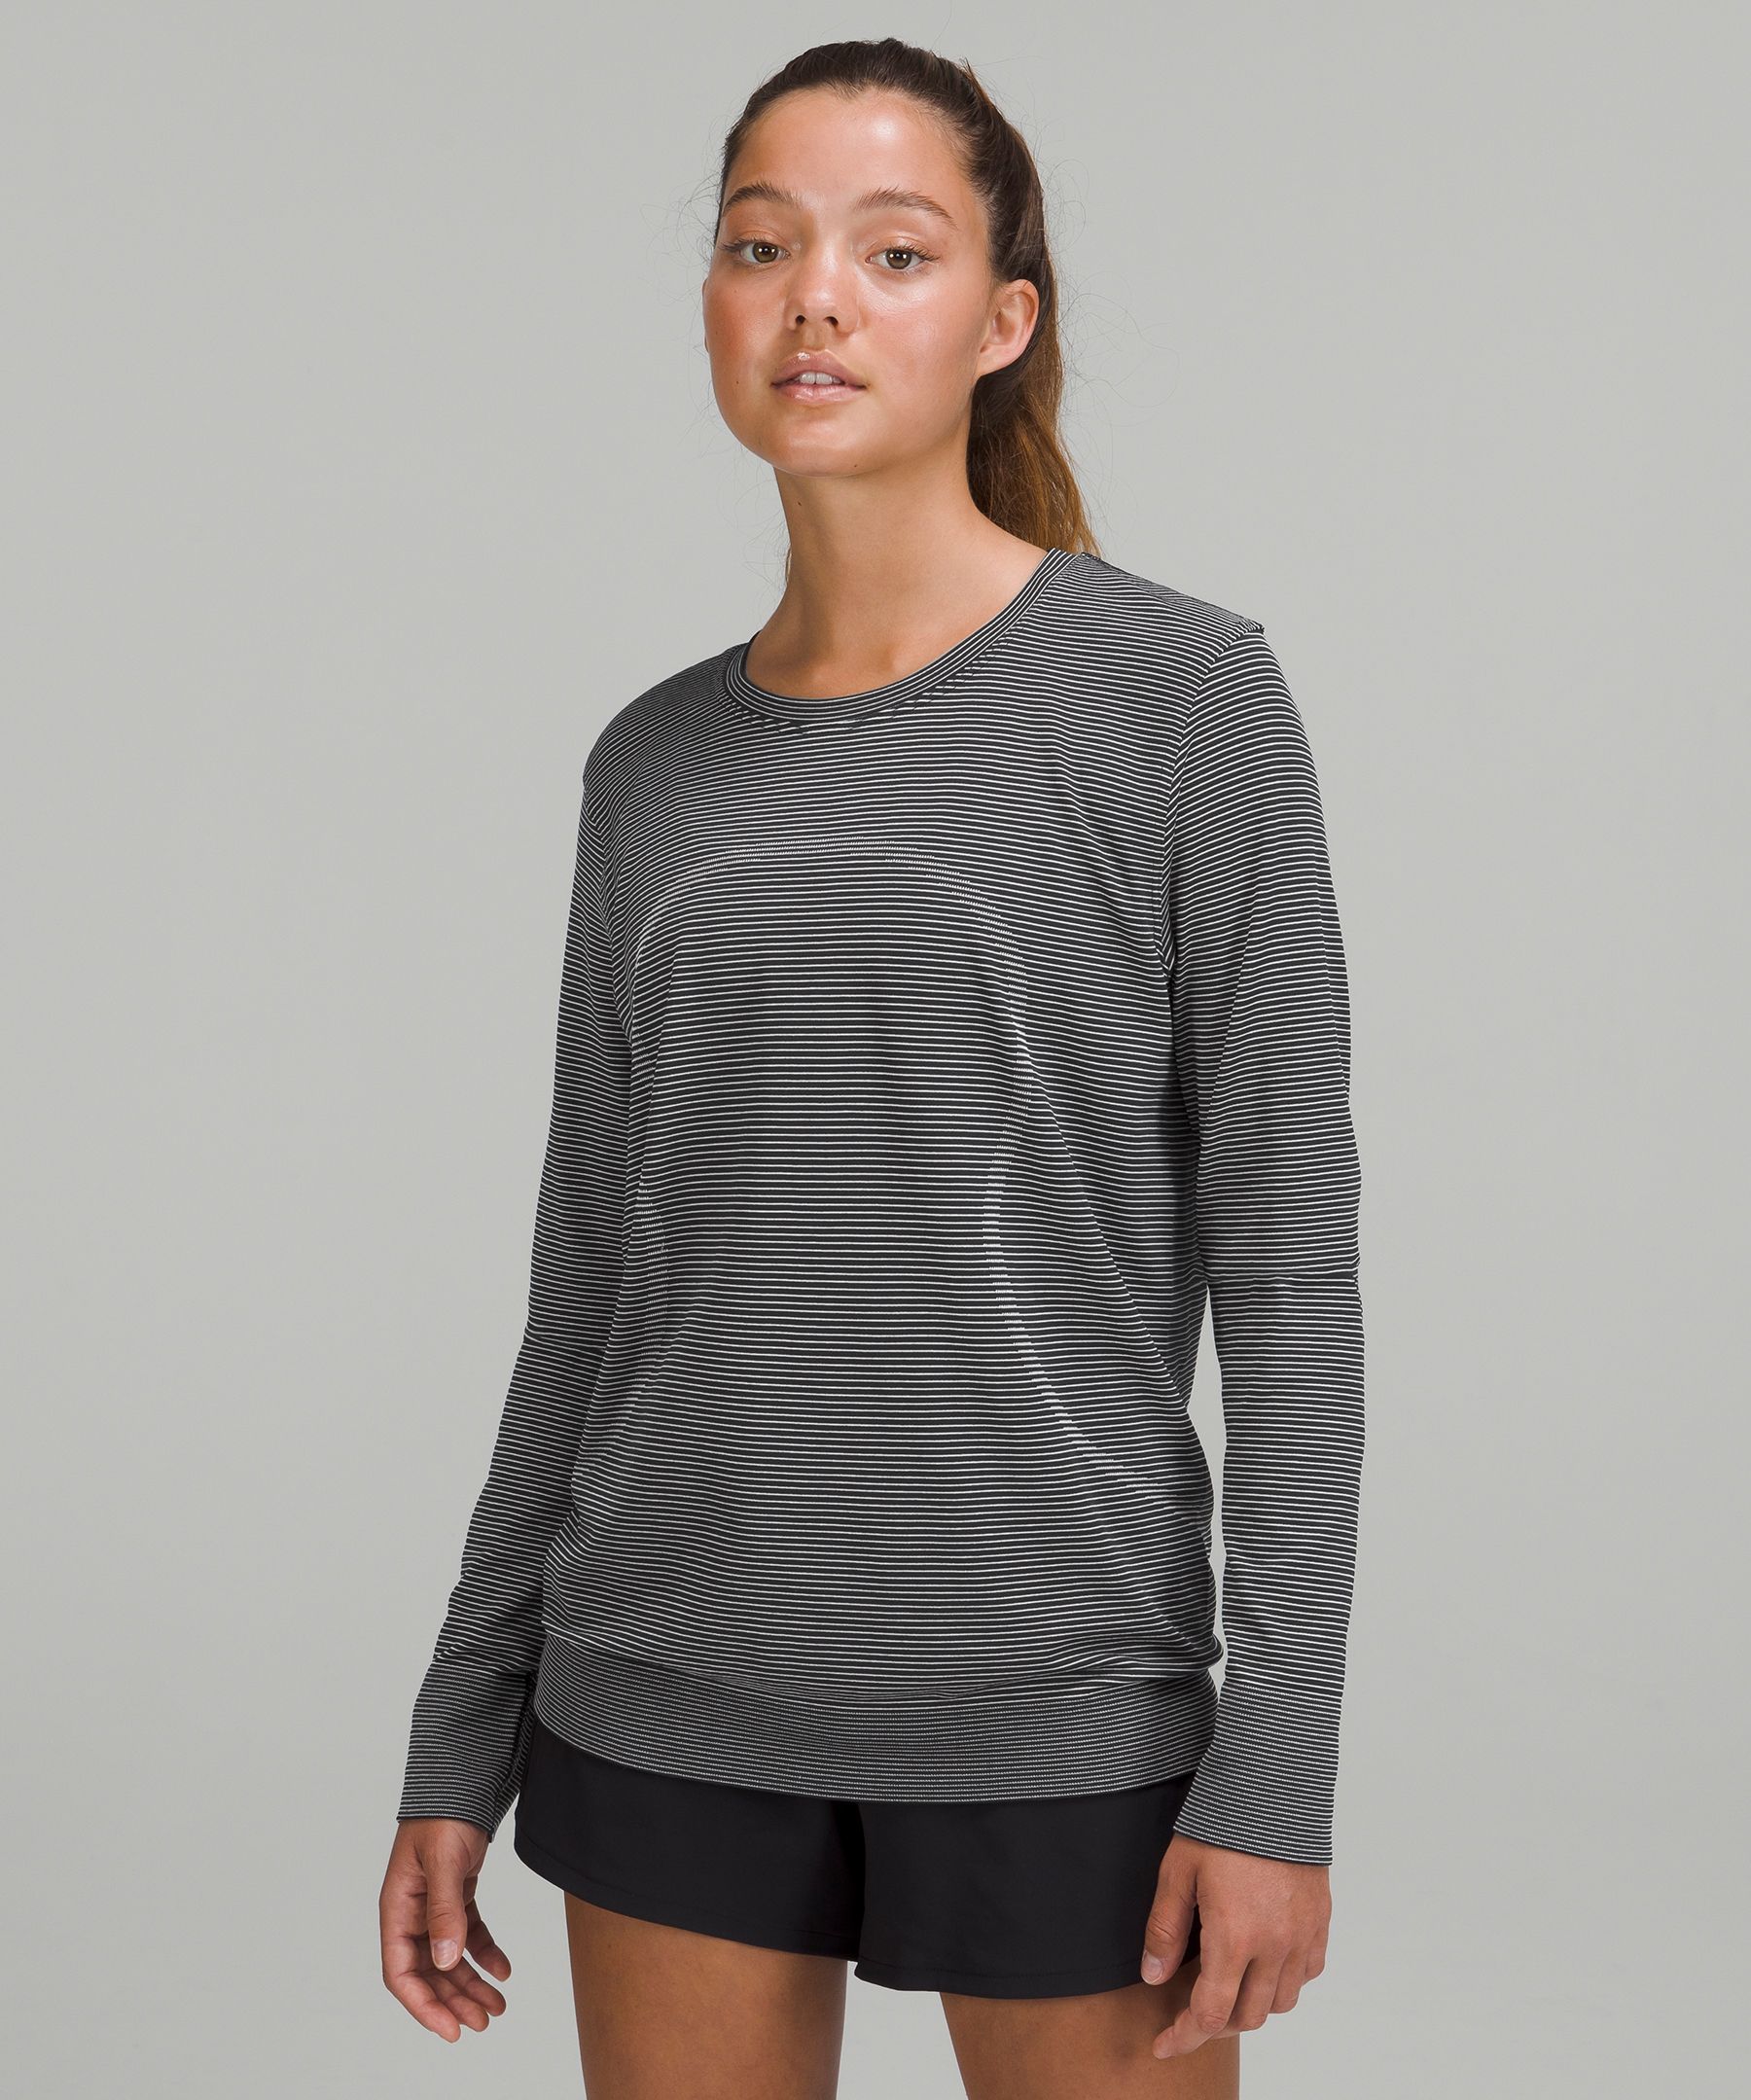 Lululemon Swiftly Relaxed-fit Long Sleeve Shirt In Tempo Stripe Black/white